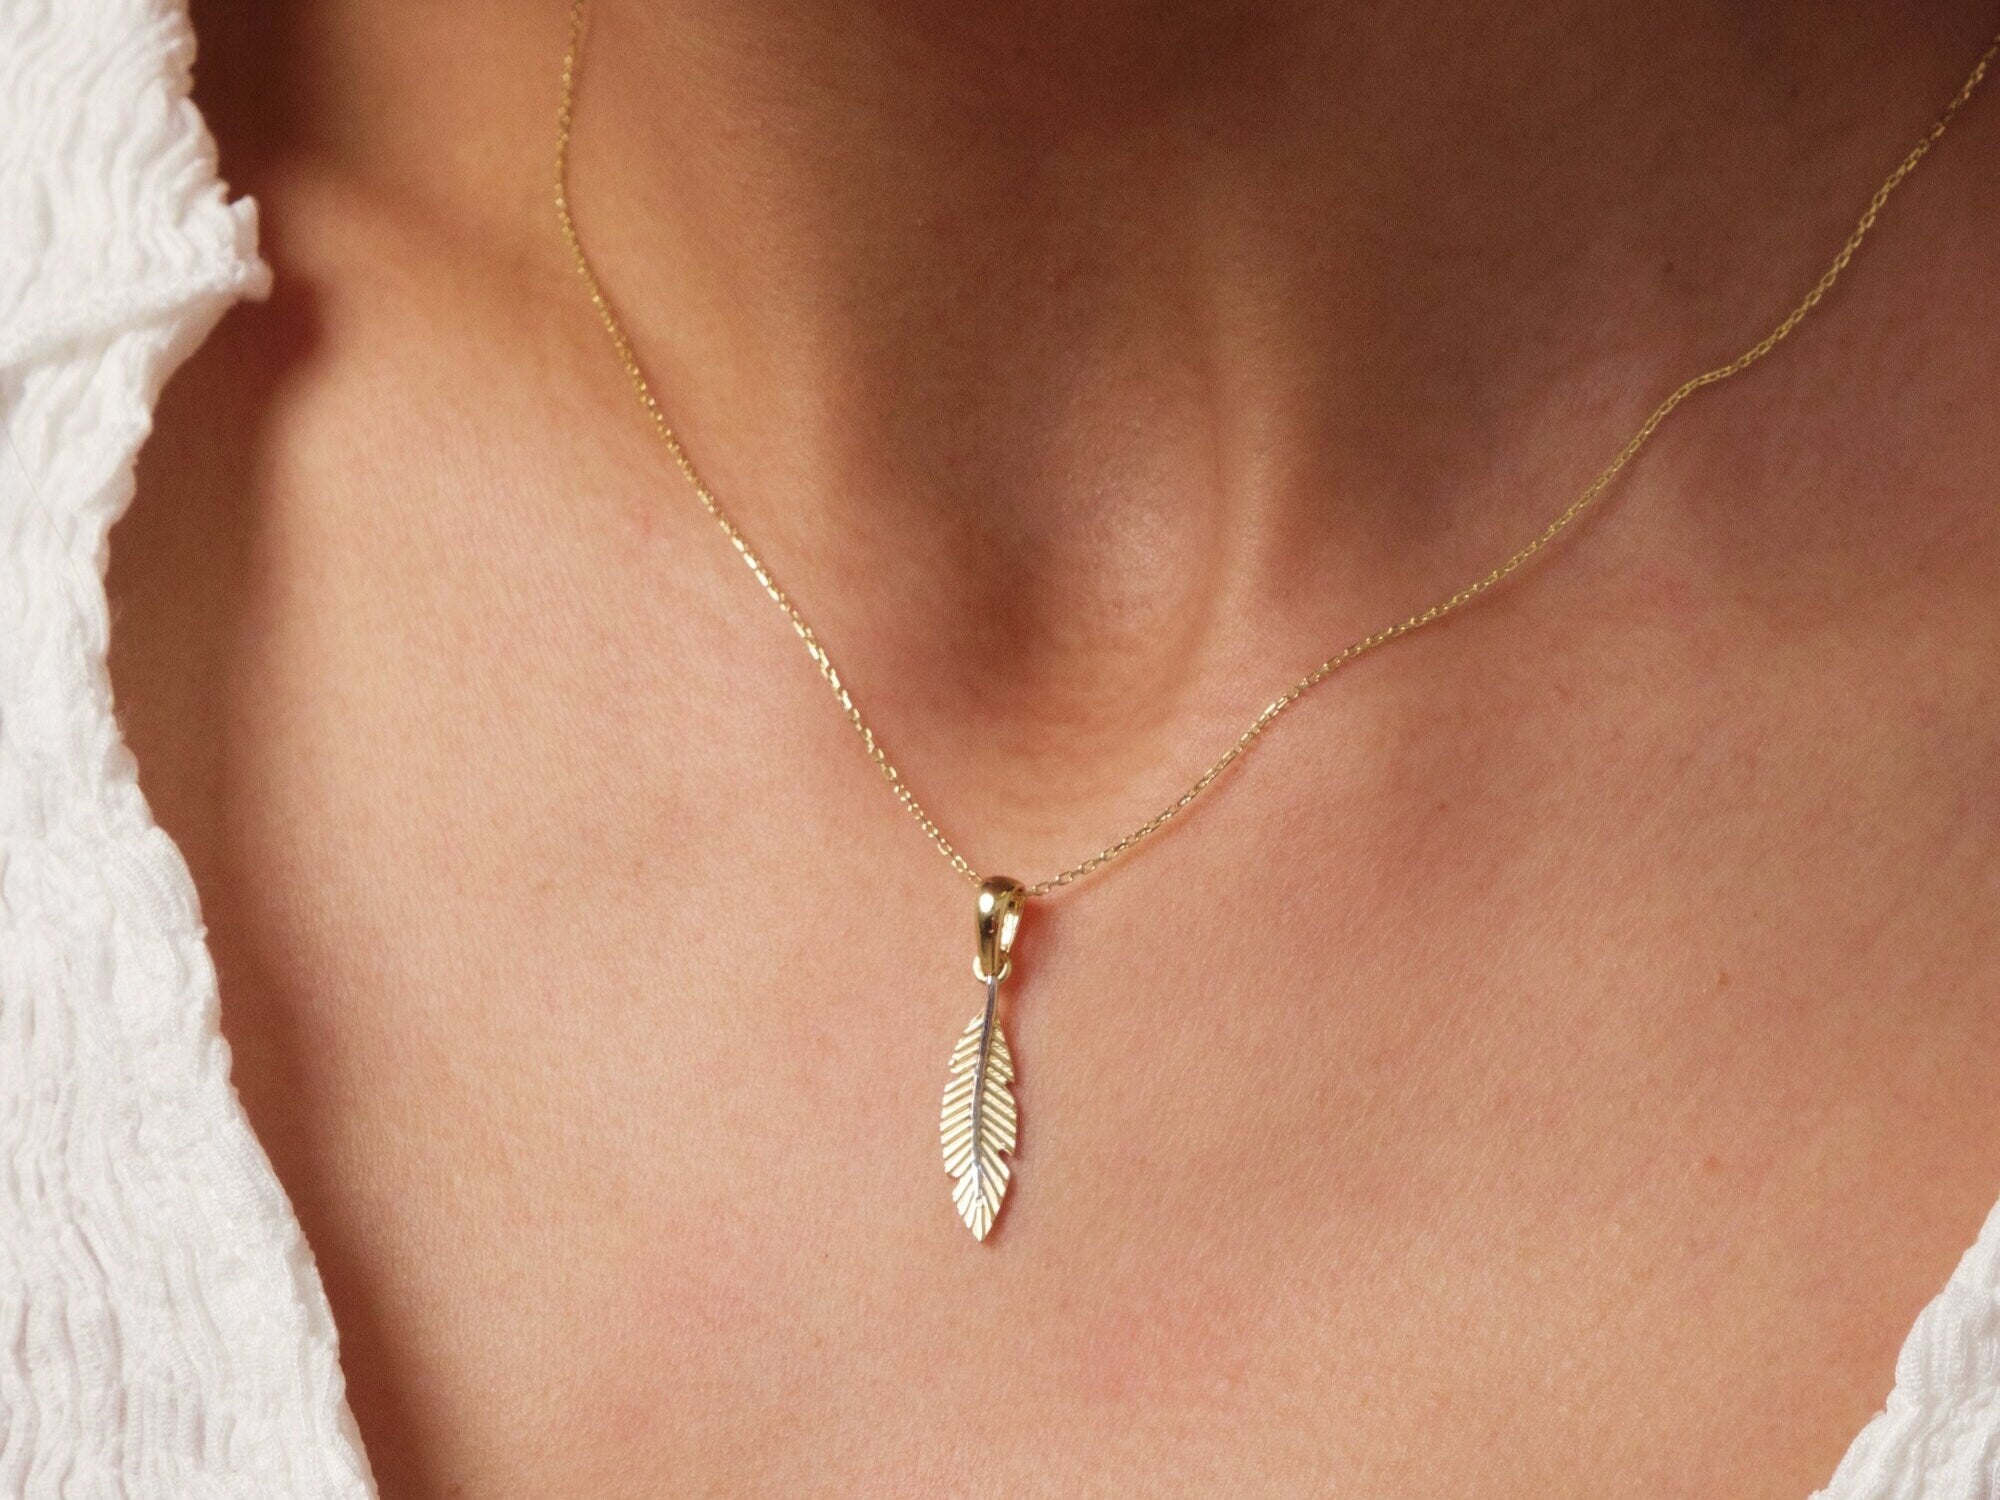 14K Gold Feather Necklace, Feather Charm Pendant, Dainty Layering Necklace, Minimal Feather Charm Choker, Leaf Necklace, Good Luck Necklace